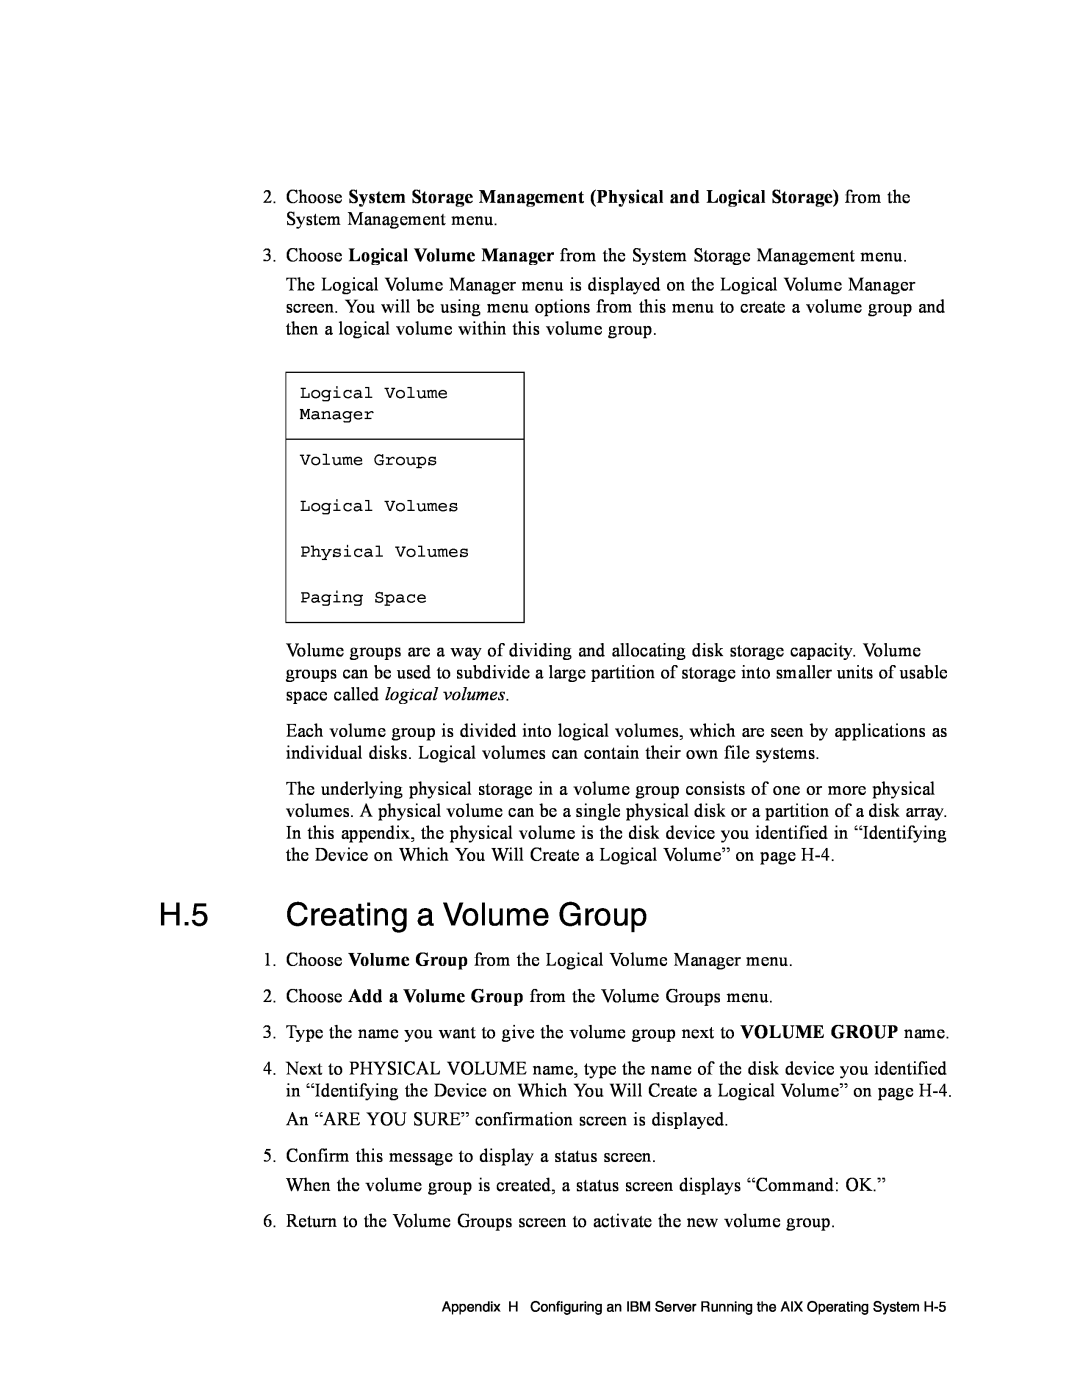 Dot Hill Systems II 200 FC service manual H.5 Creating a Volume Group 